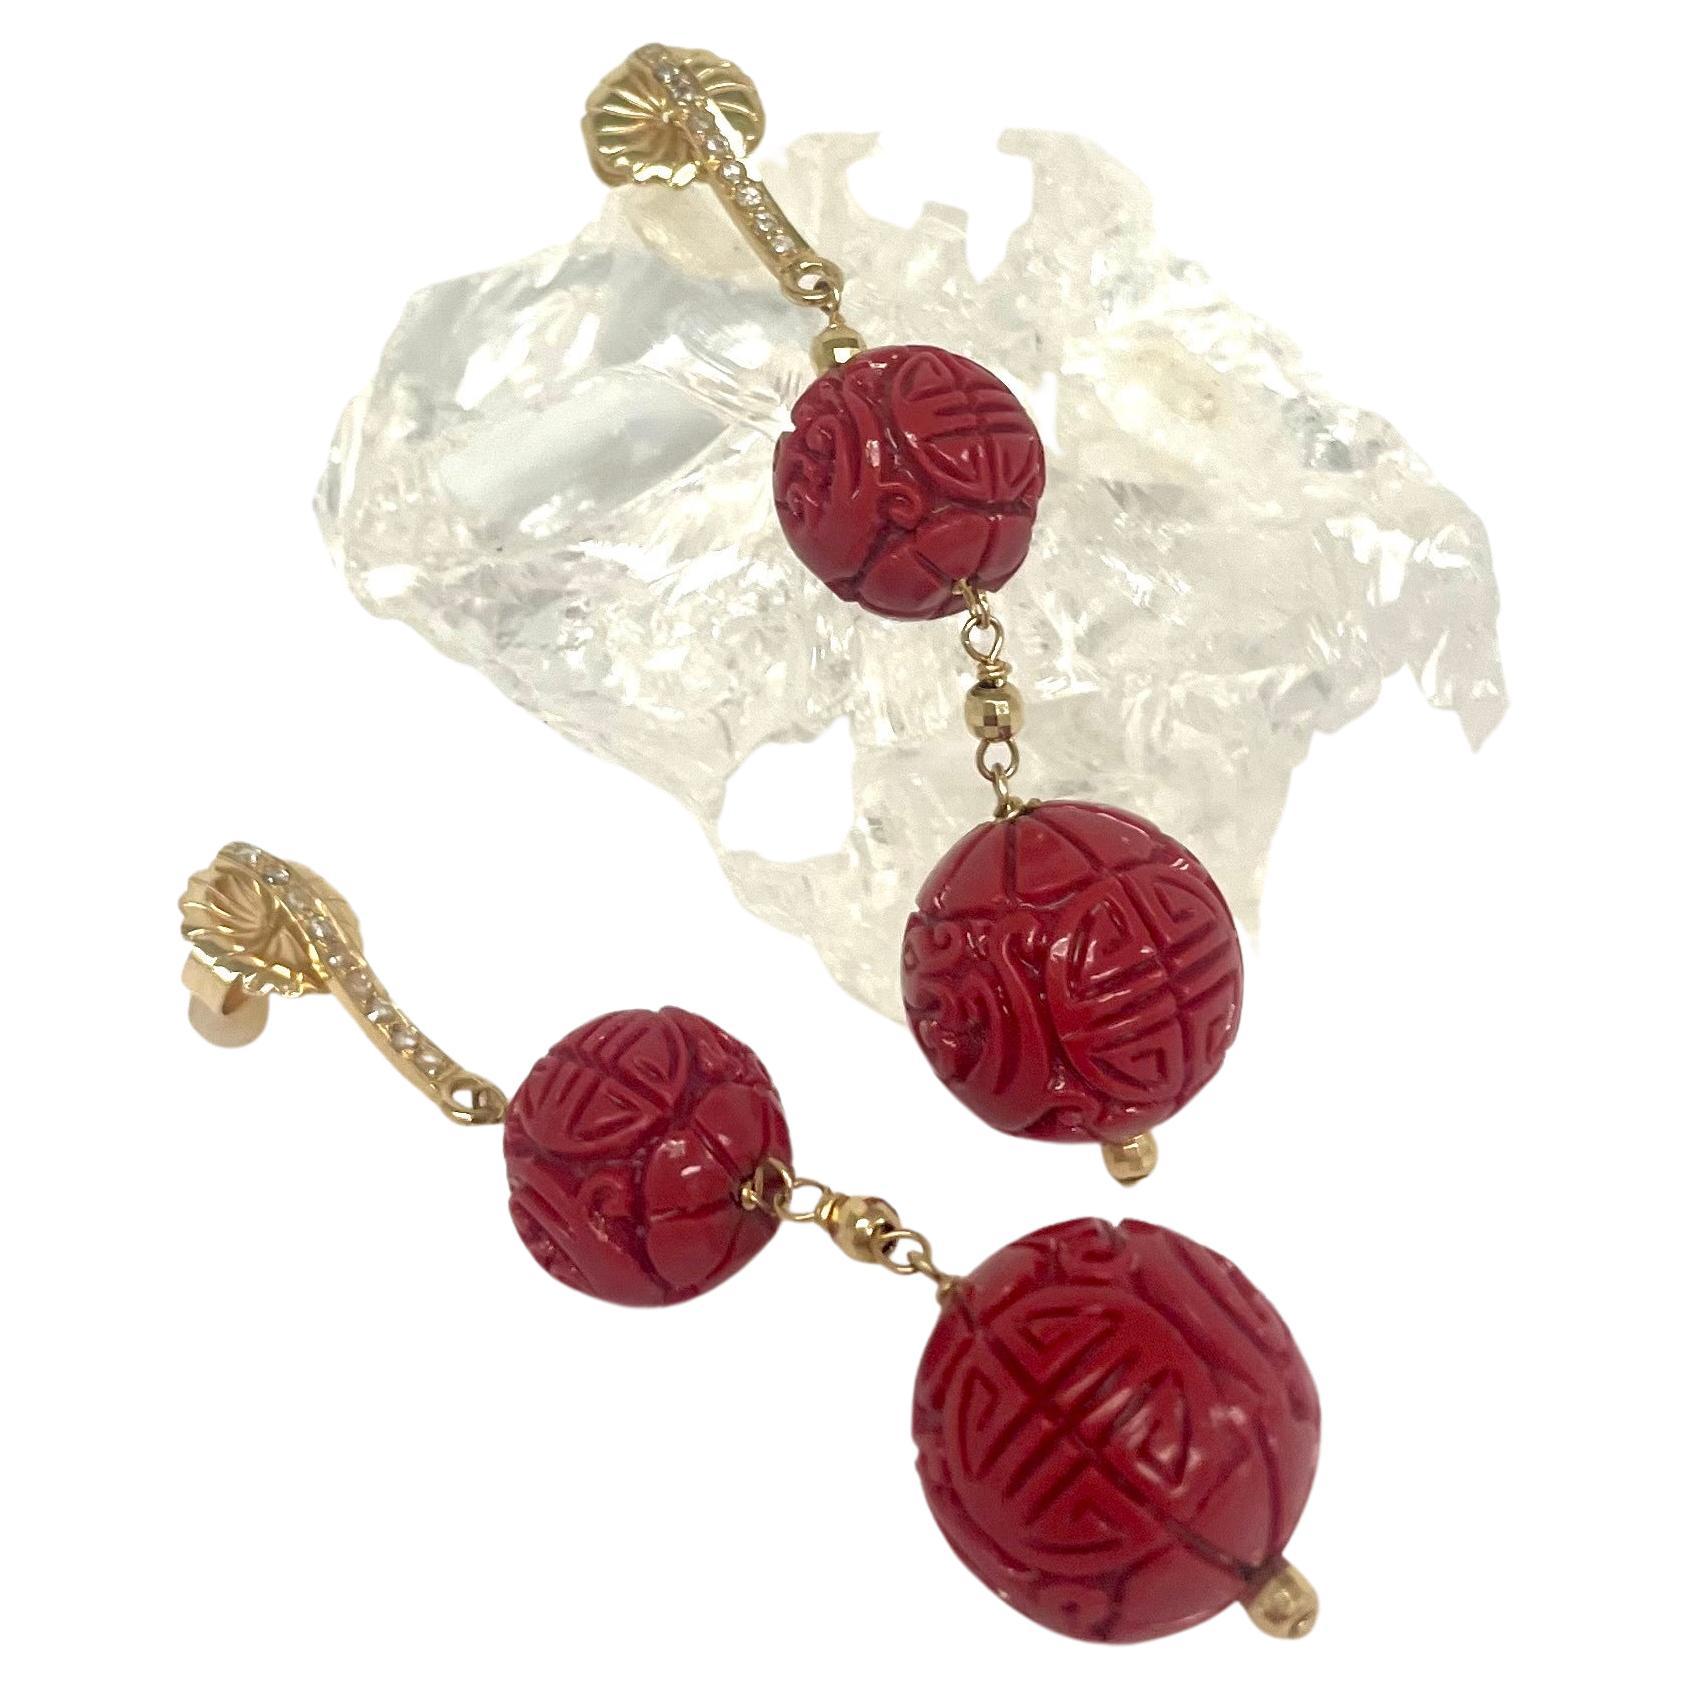 Description
Striking, vibrant, beautifully carved cinnabar red balls accented with 14k yellow gold faceted beads and suspended from pave diamond wavy bar posts to create a unique harmonized two drop style earring.
Item # E3365

Materials and